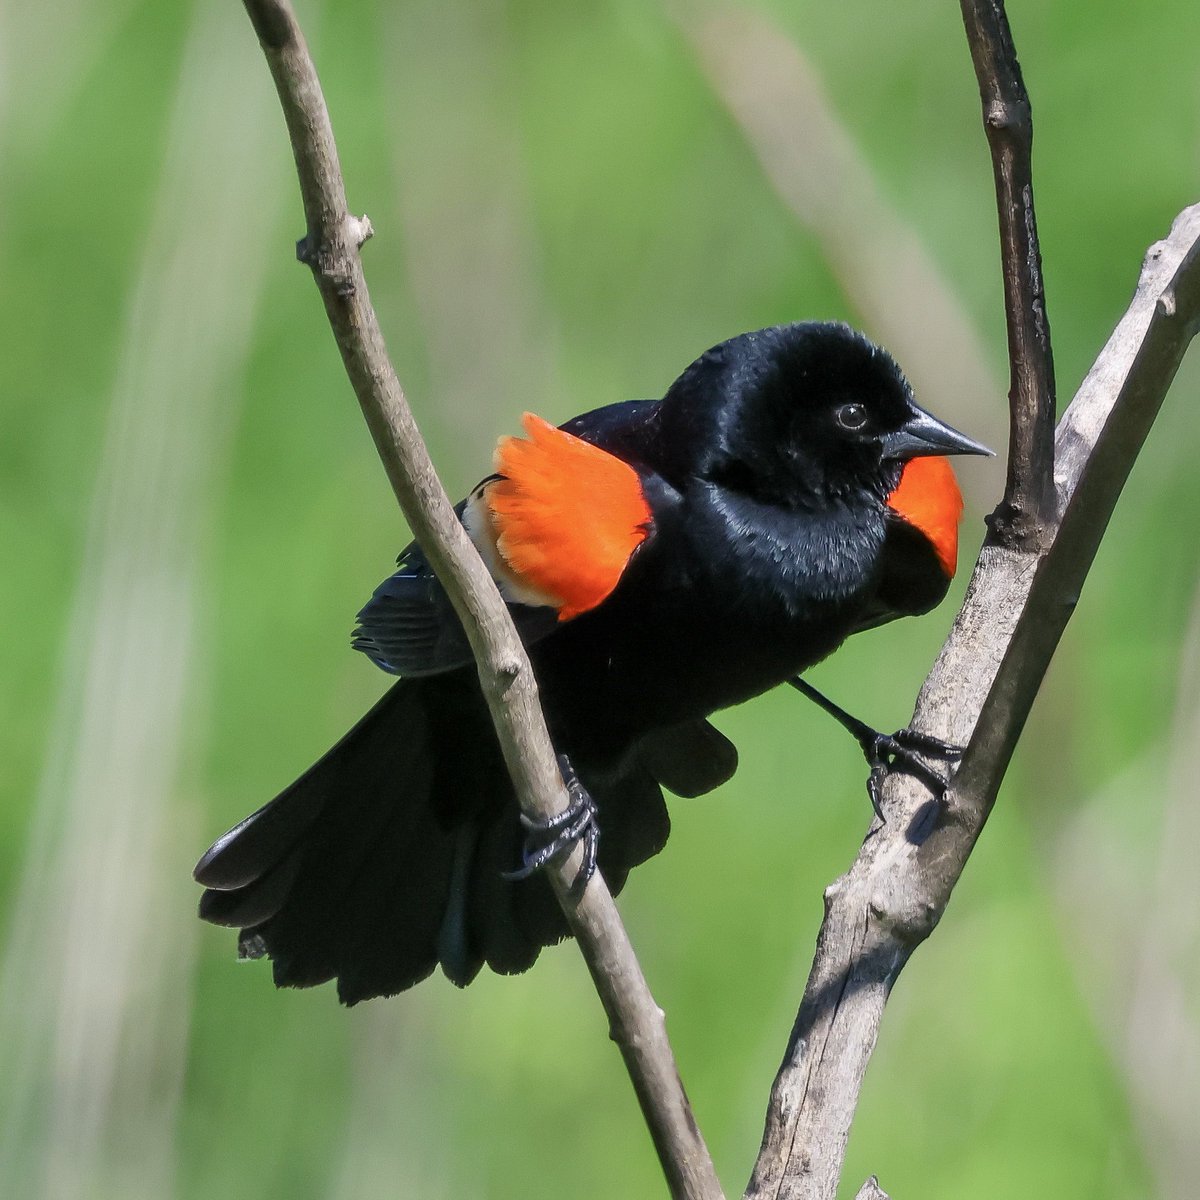 Another of the Red-winged Blackbird.